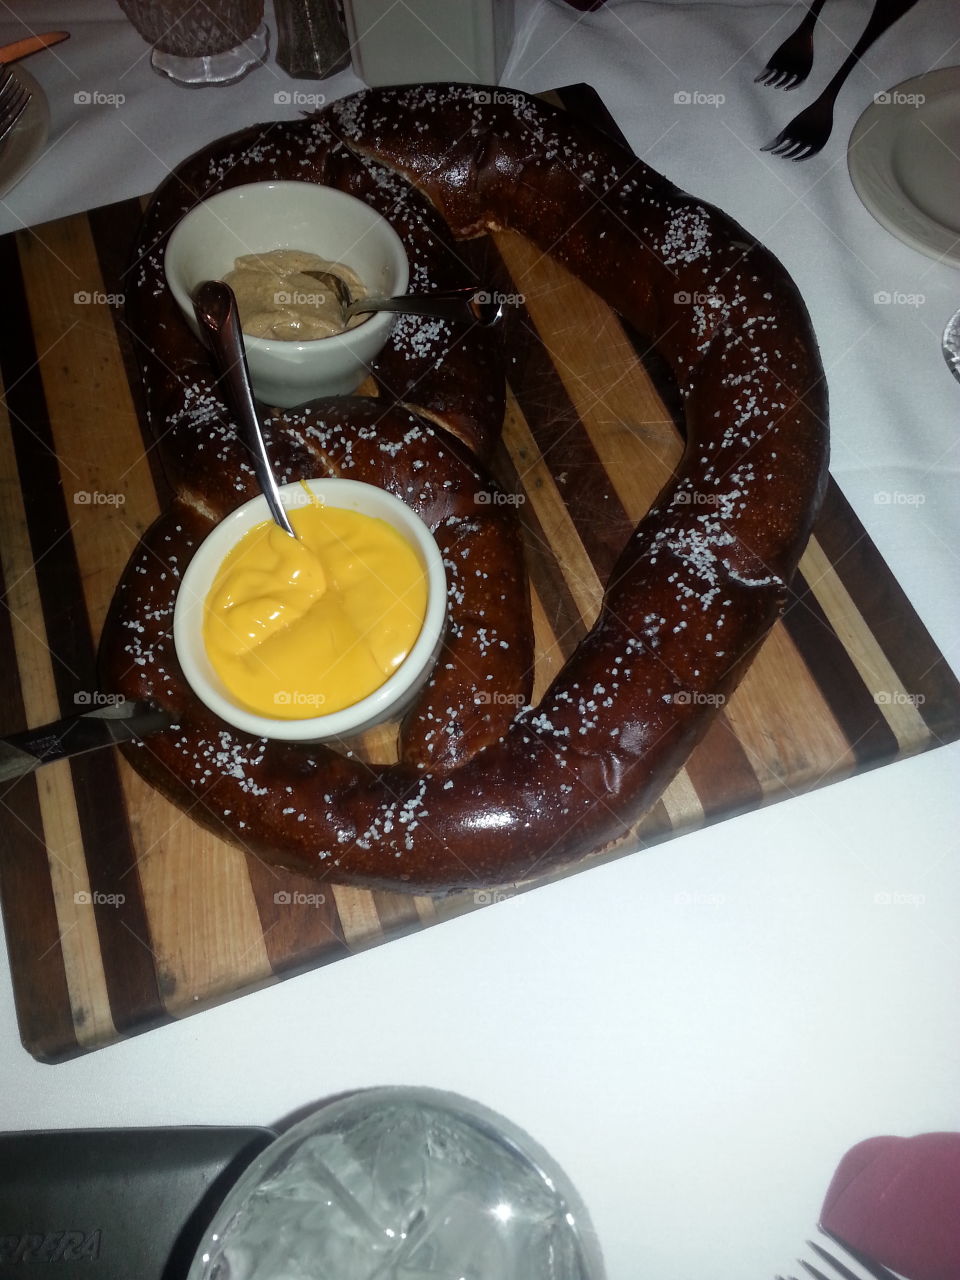 pretzel with mustard and cheese